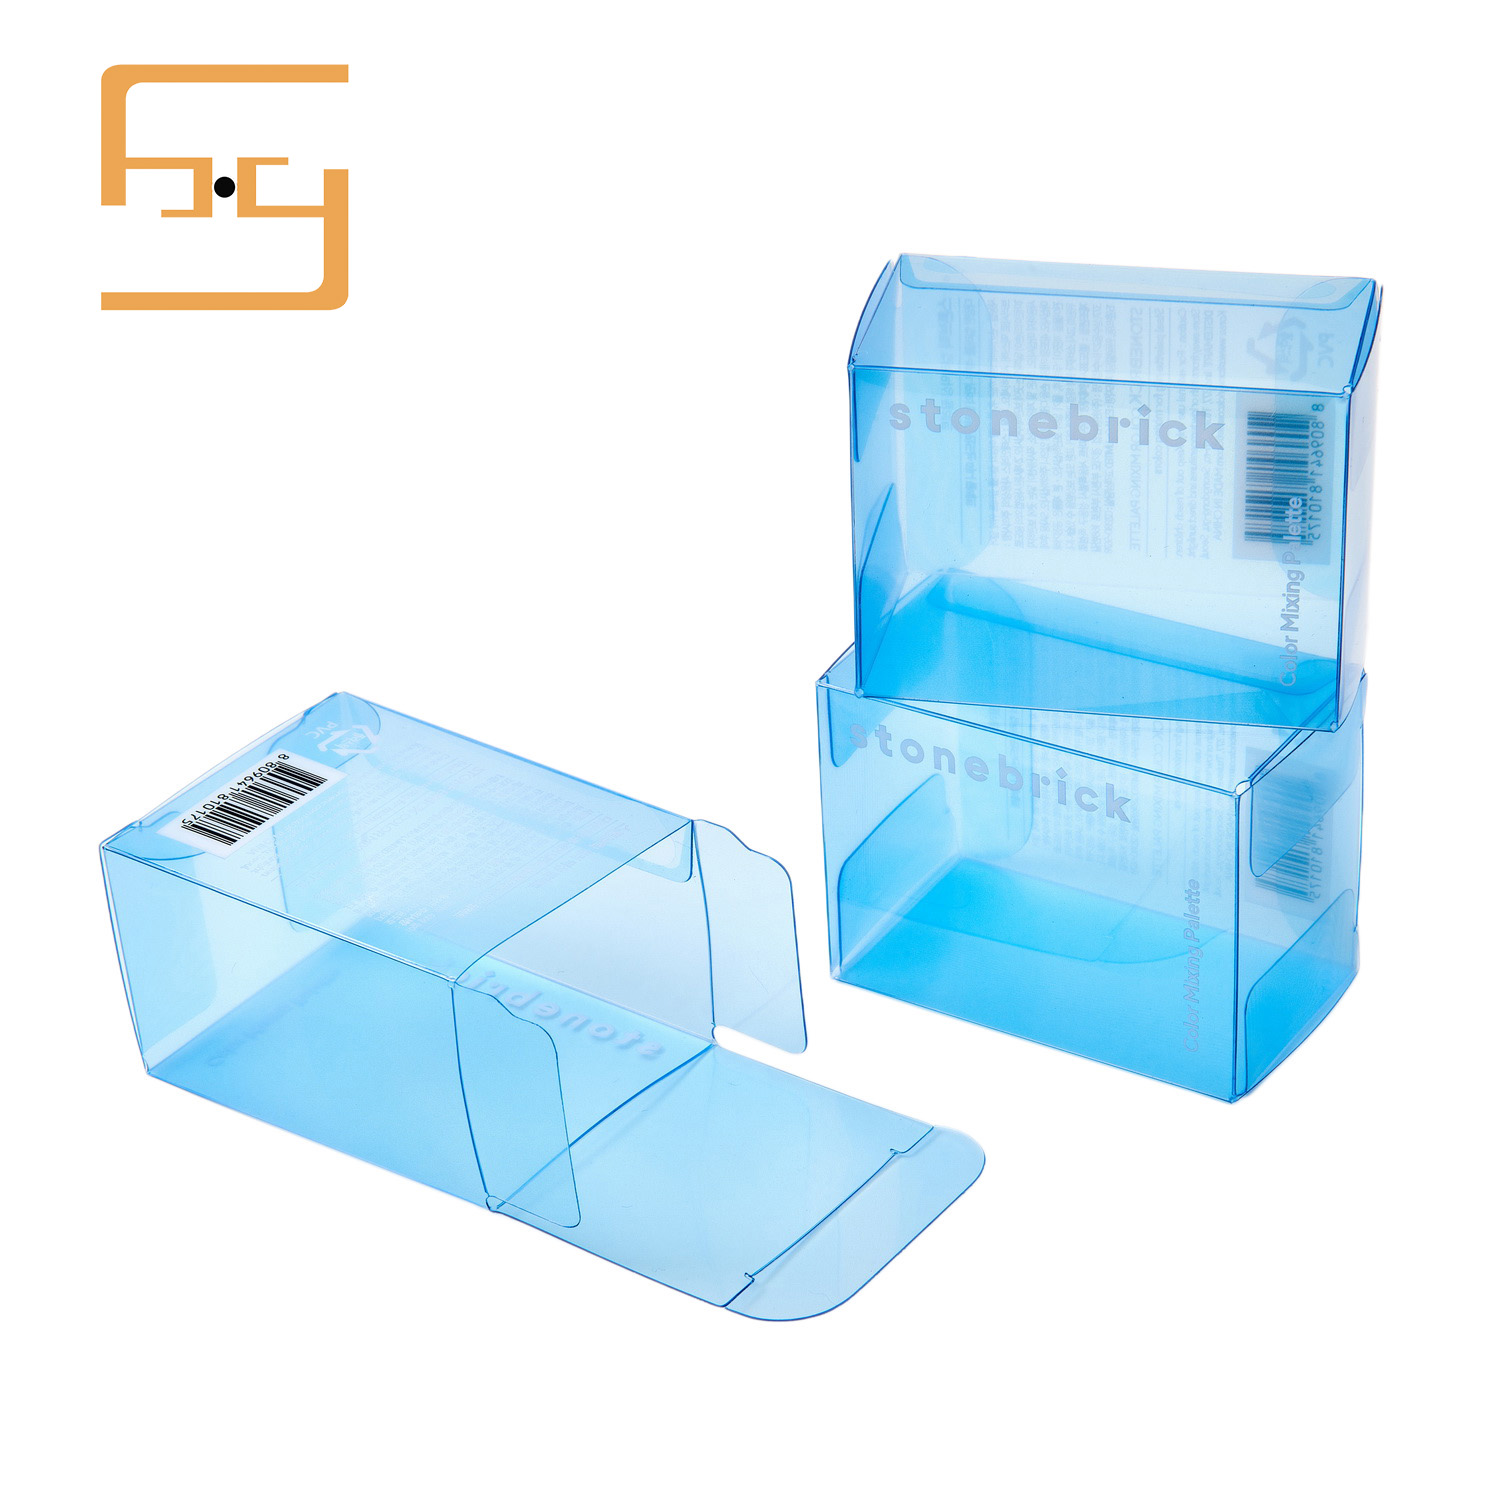 How to Choose the Plastic Packaging Box for Your Product